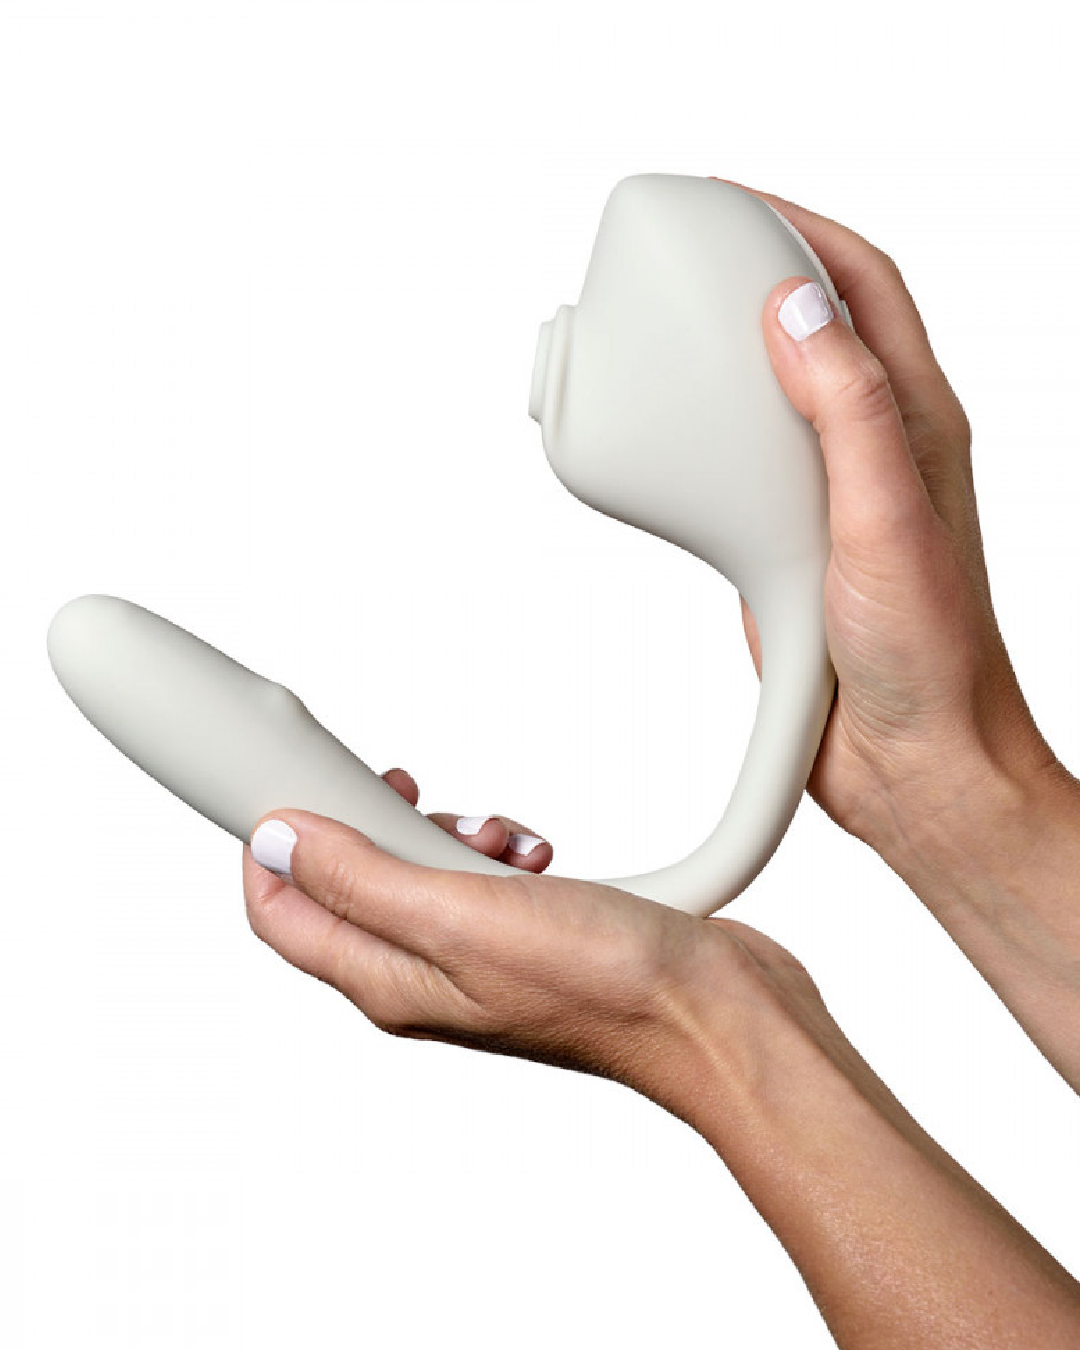 Lora DiCarlo Osé 2 Robotic Clitoral Suction & G-Spot Vibe held in a person's hand showing the flexibility of the insertable arm